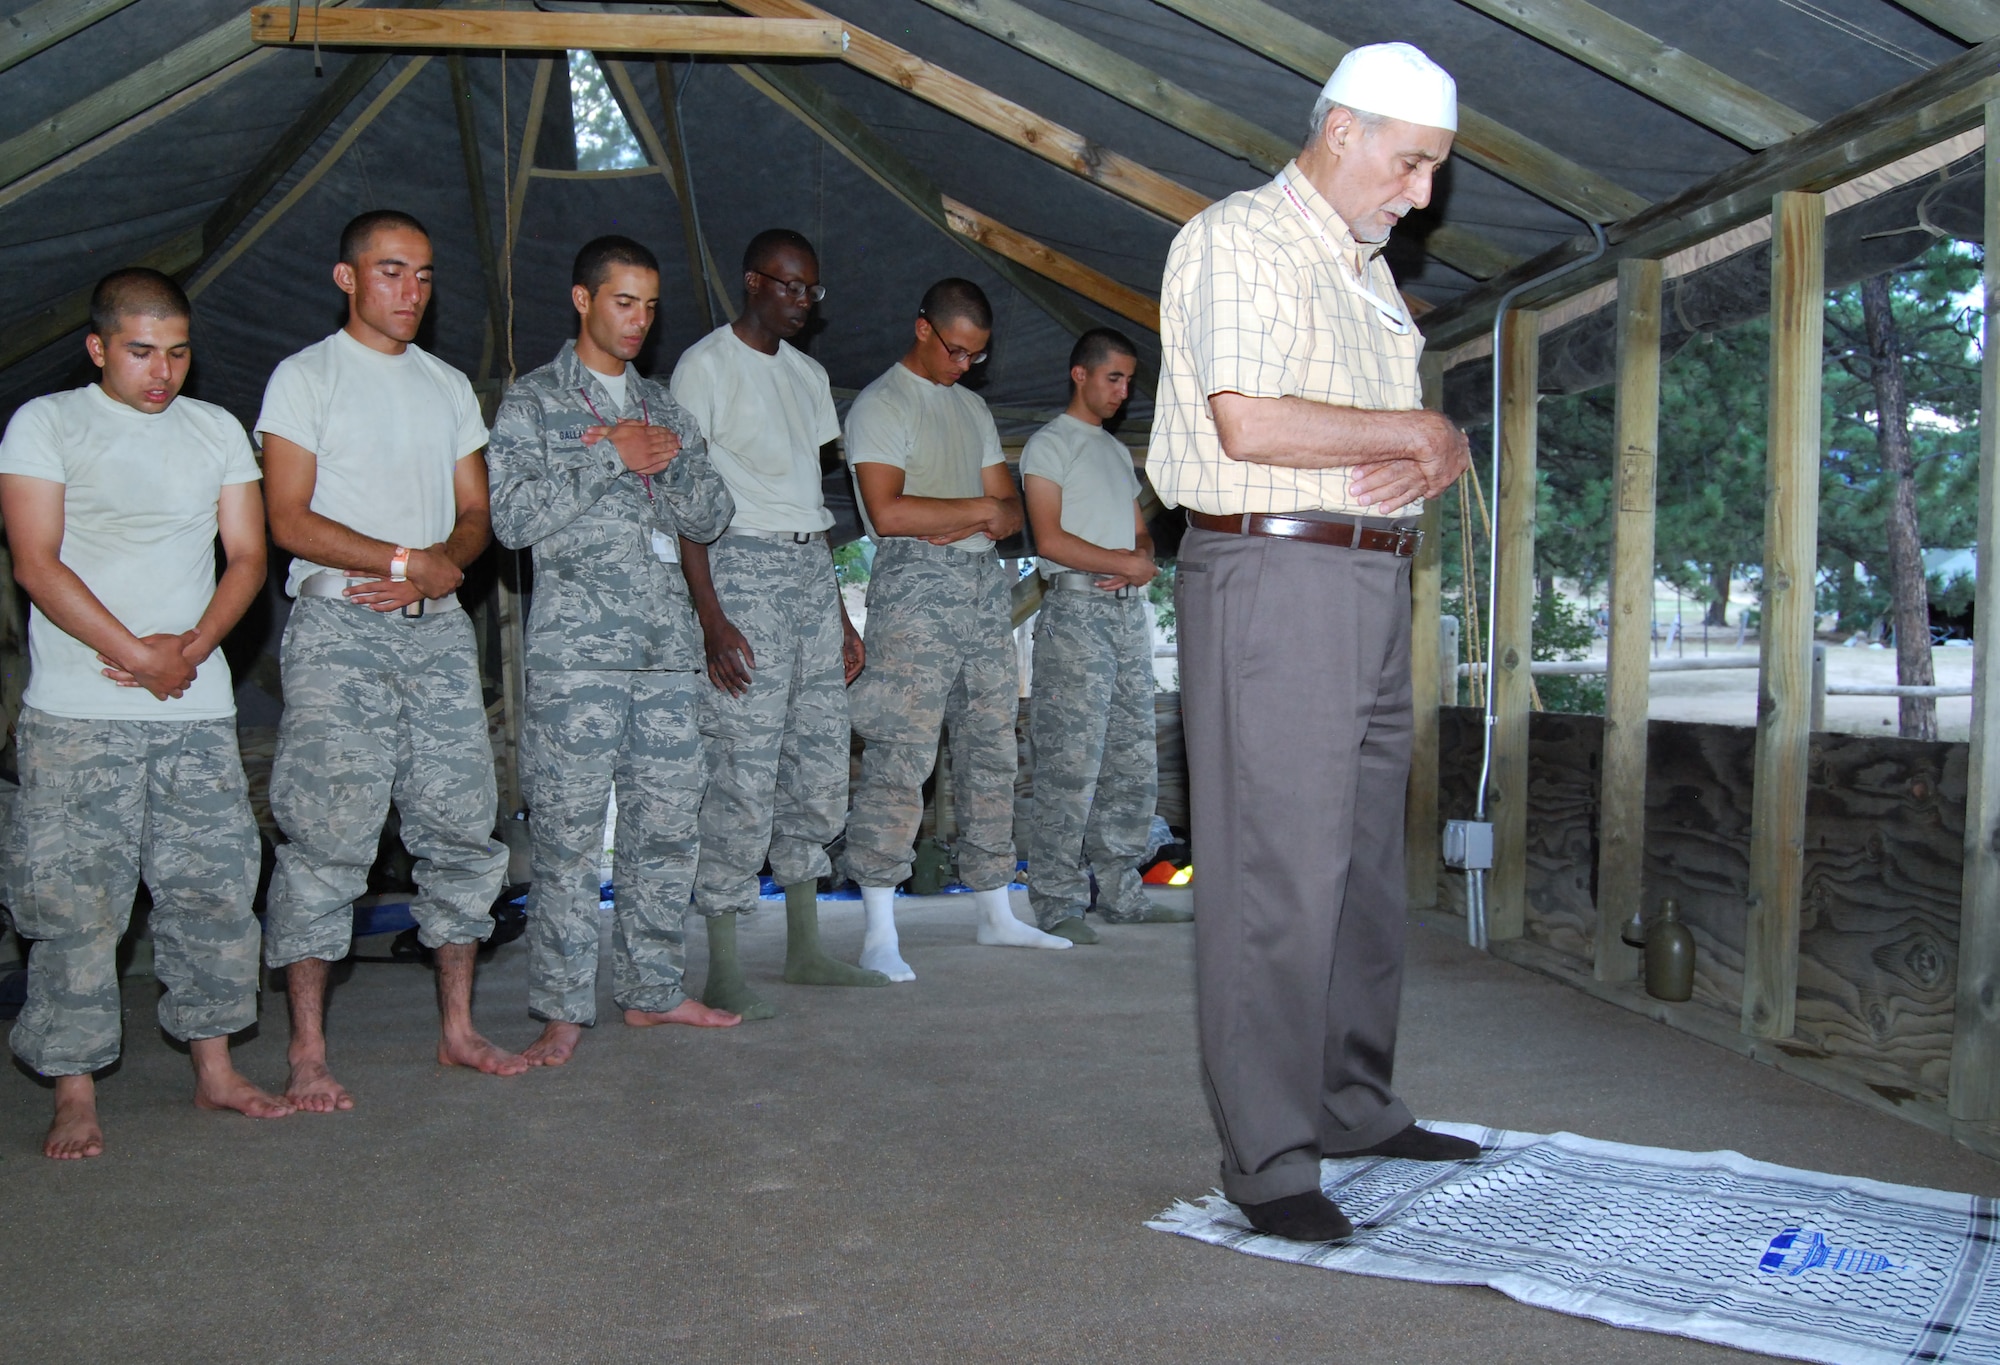 Imam Mohamed Jodeh leads basic cadets in evening prayer during a Muslim service in Jacks Valley July 22, 2012. While Muslims normally fast during Ramadan, which began July 20, Jodeh instructed the basics not to fast while they underwent Basic Cadet Training. (U.S. Air Force photo/Don Branum)